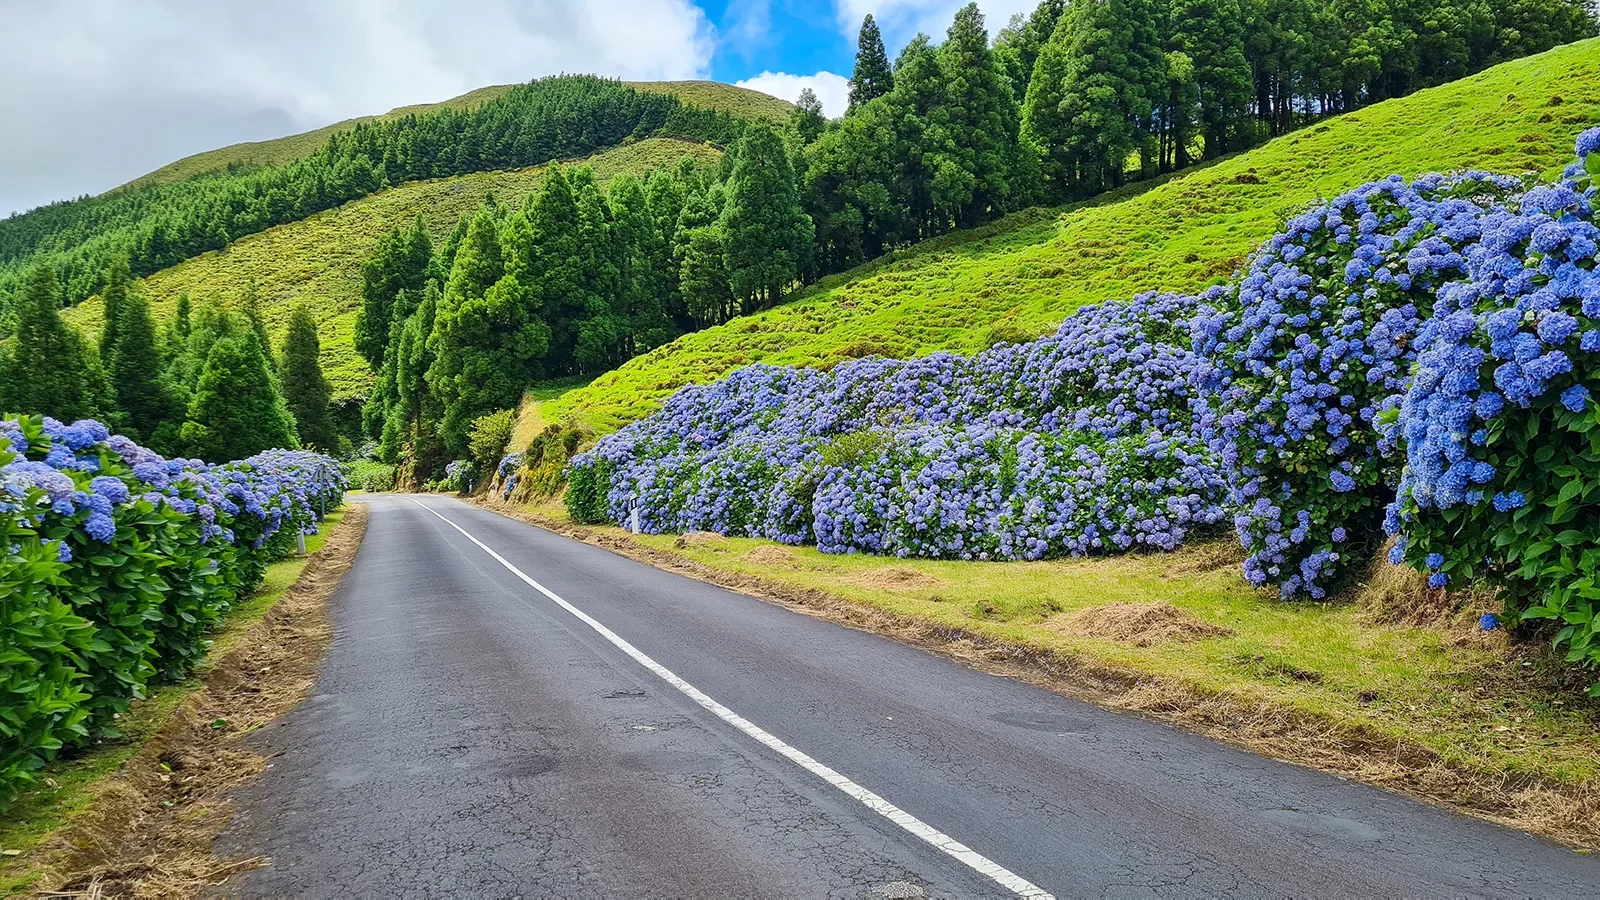 Flowering street with beautiful blue hydrangeas on Sao Miguel, Azores, Portugal